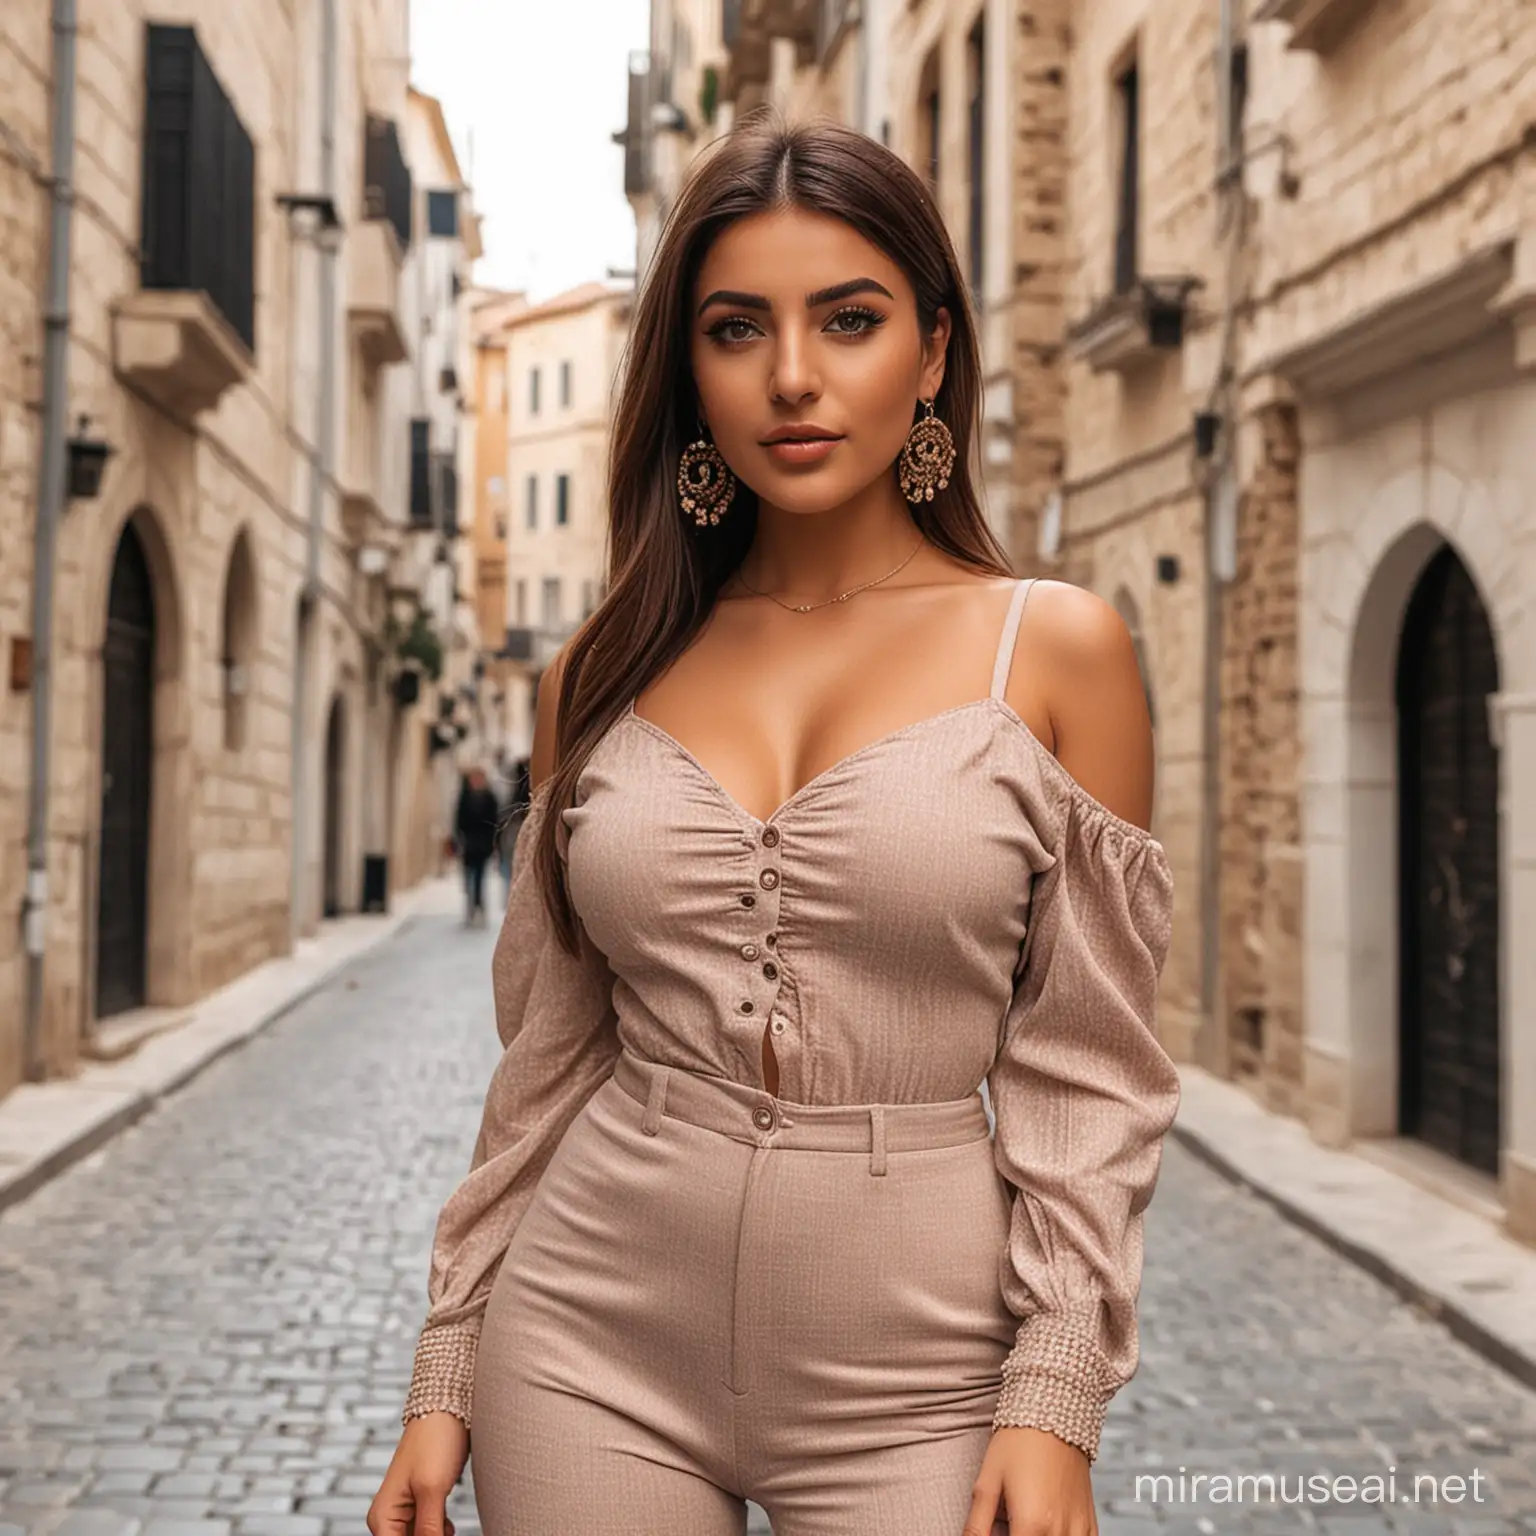 Could you create a Turkish female influencer between the ages of 25 and 35 with a modern appearance?